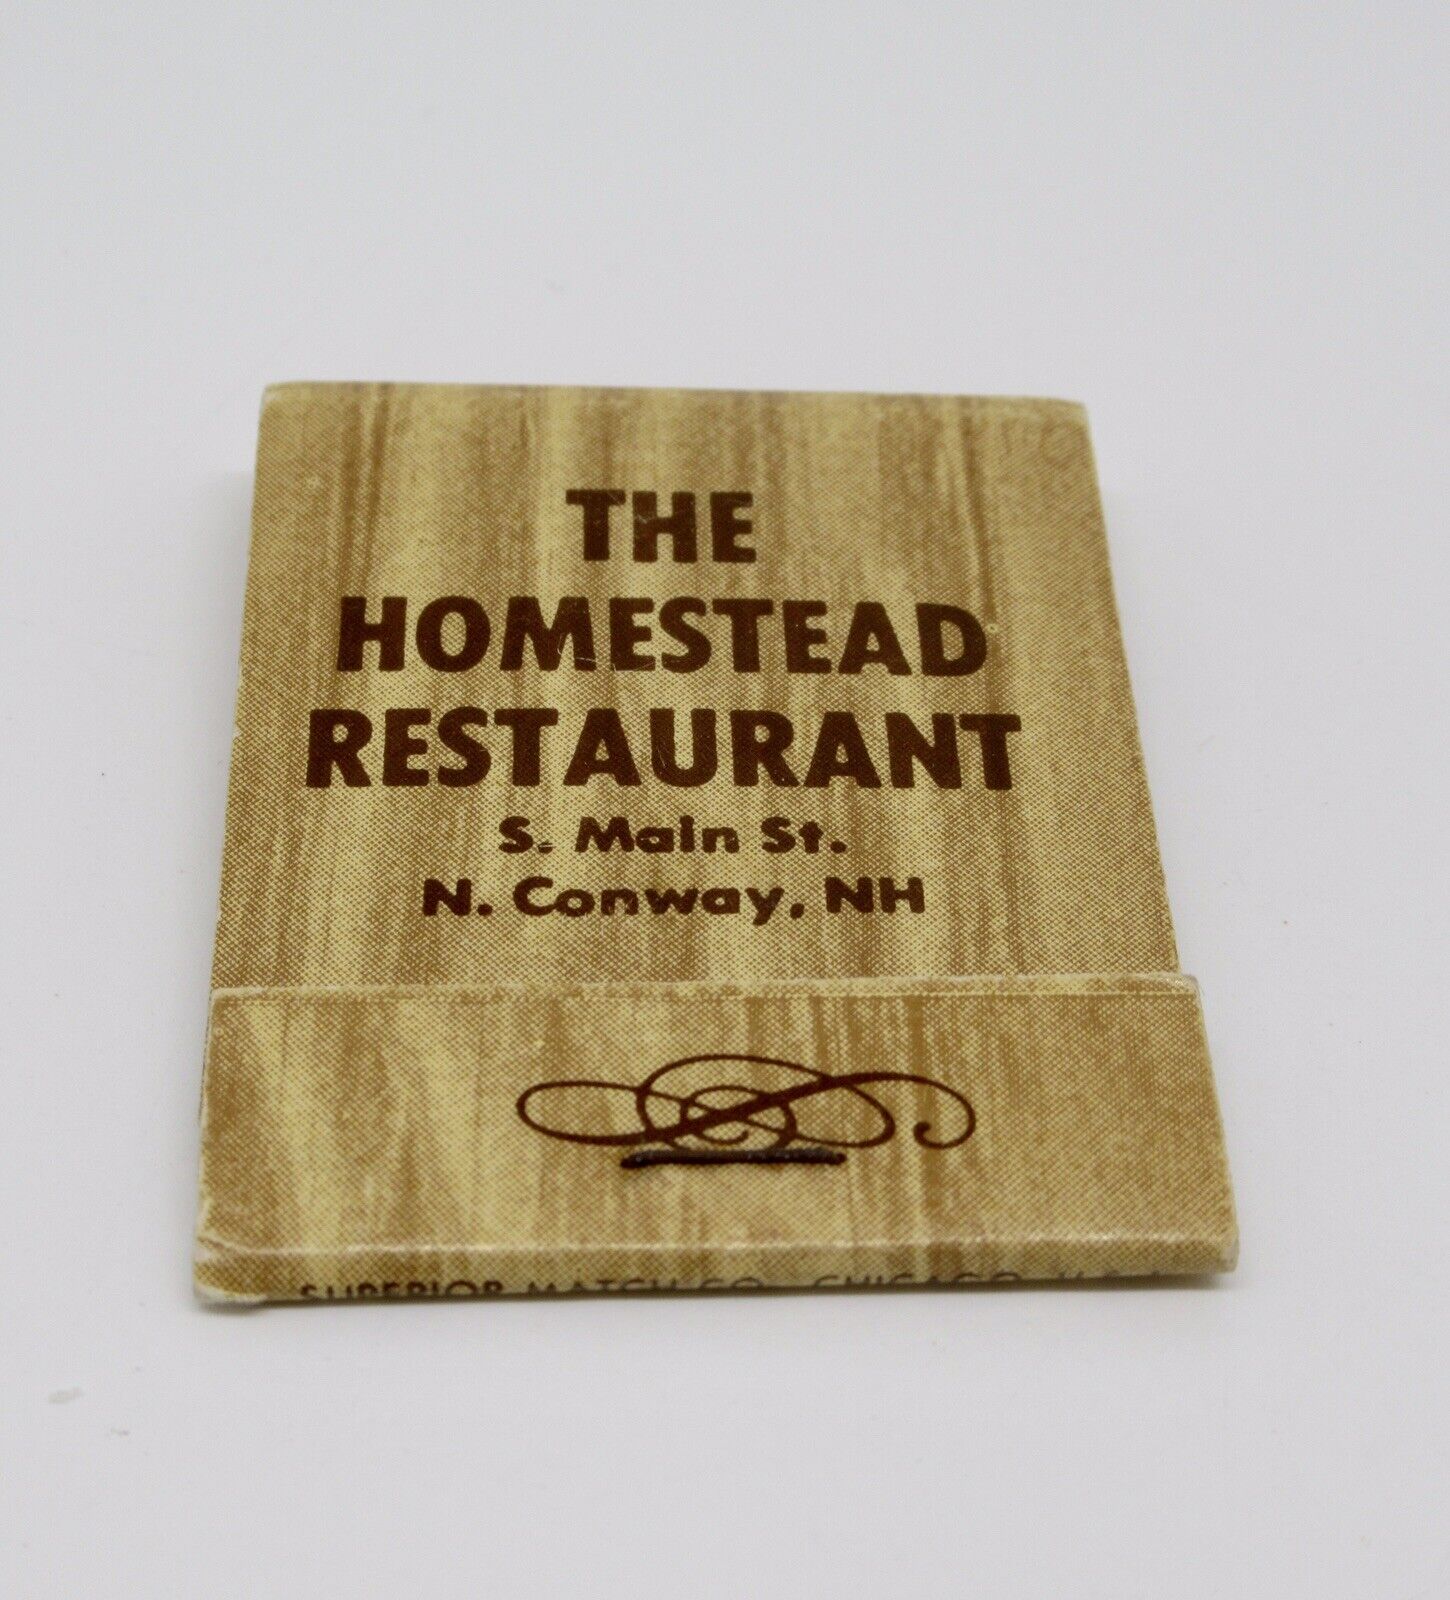 The Homestead Restaurant S. Main Street N. Conway New Hampshire FULL Matchbook